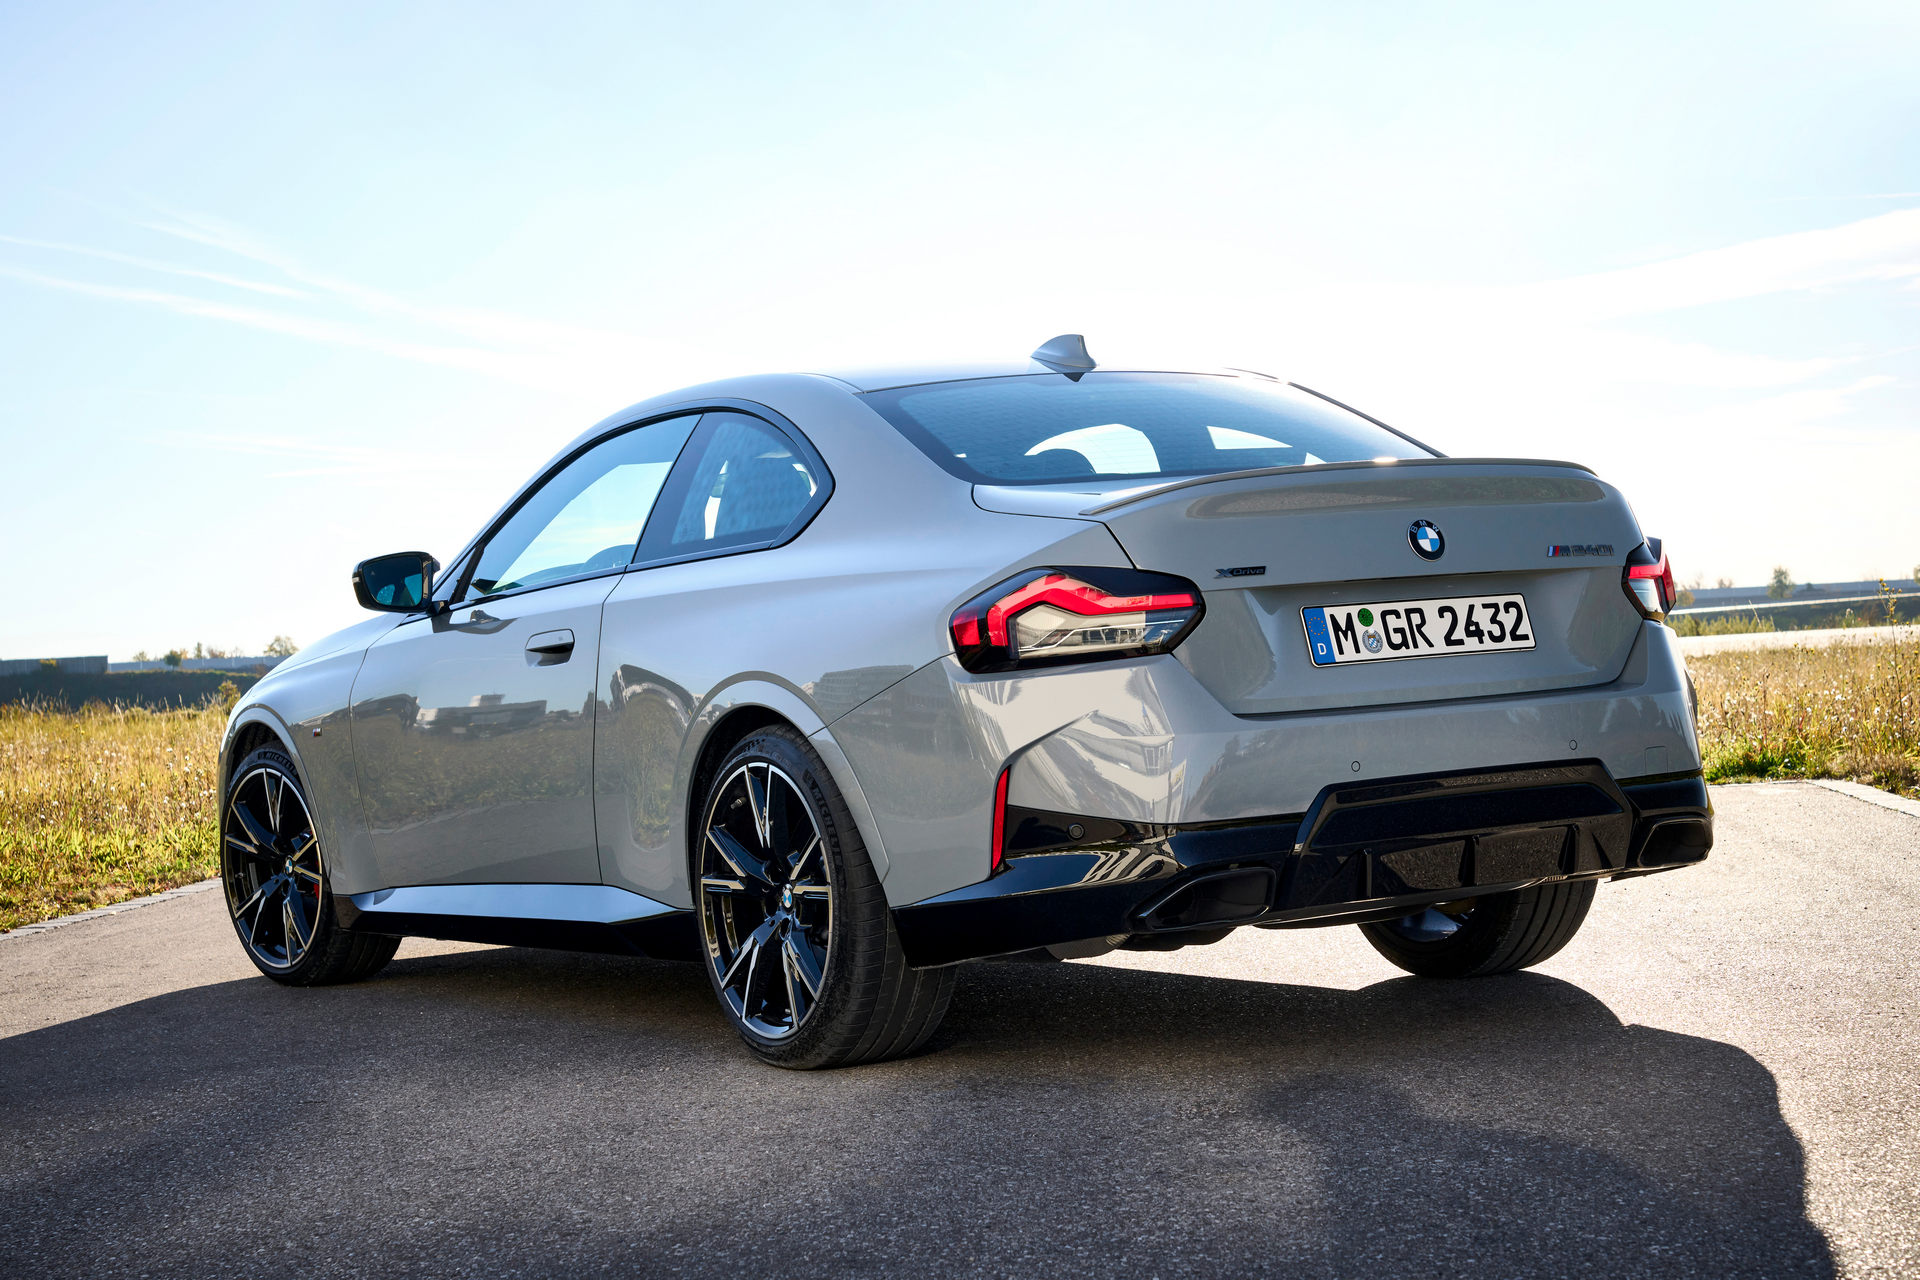 2022 BMW M240i Xdrive Coupe Vehicle Details